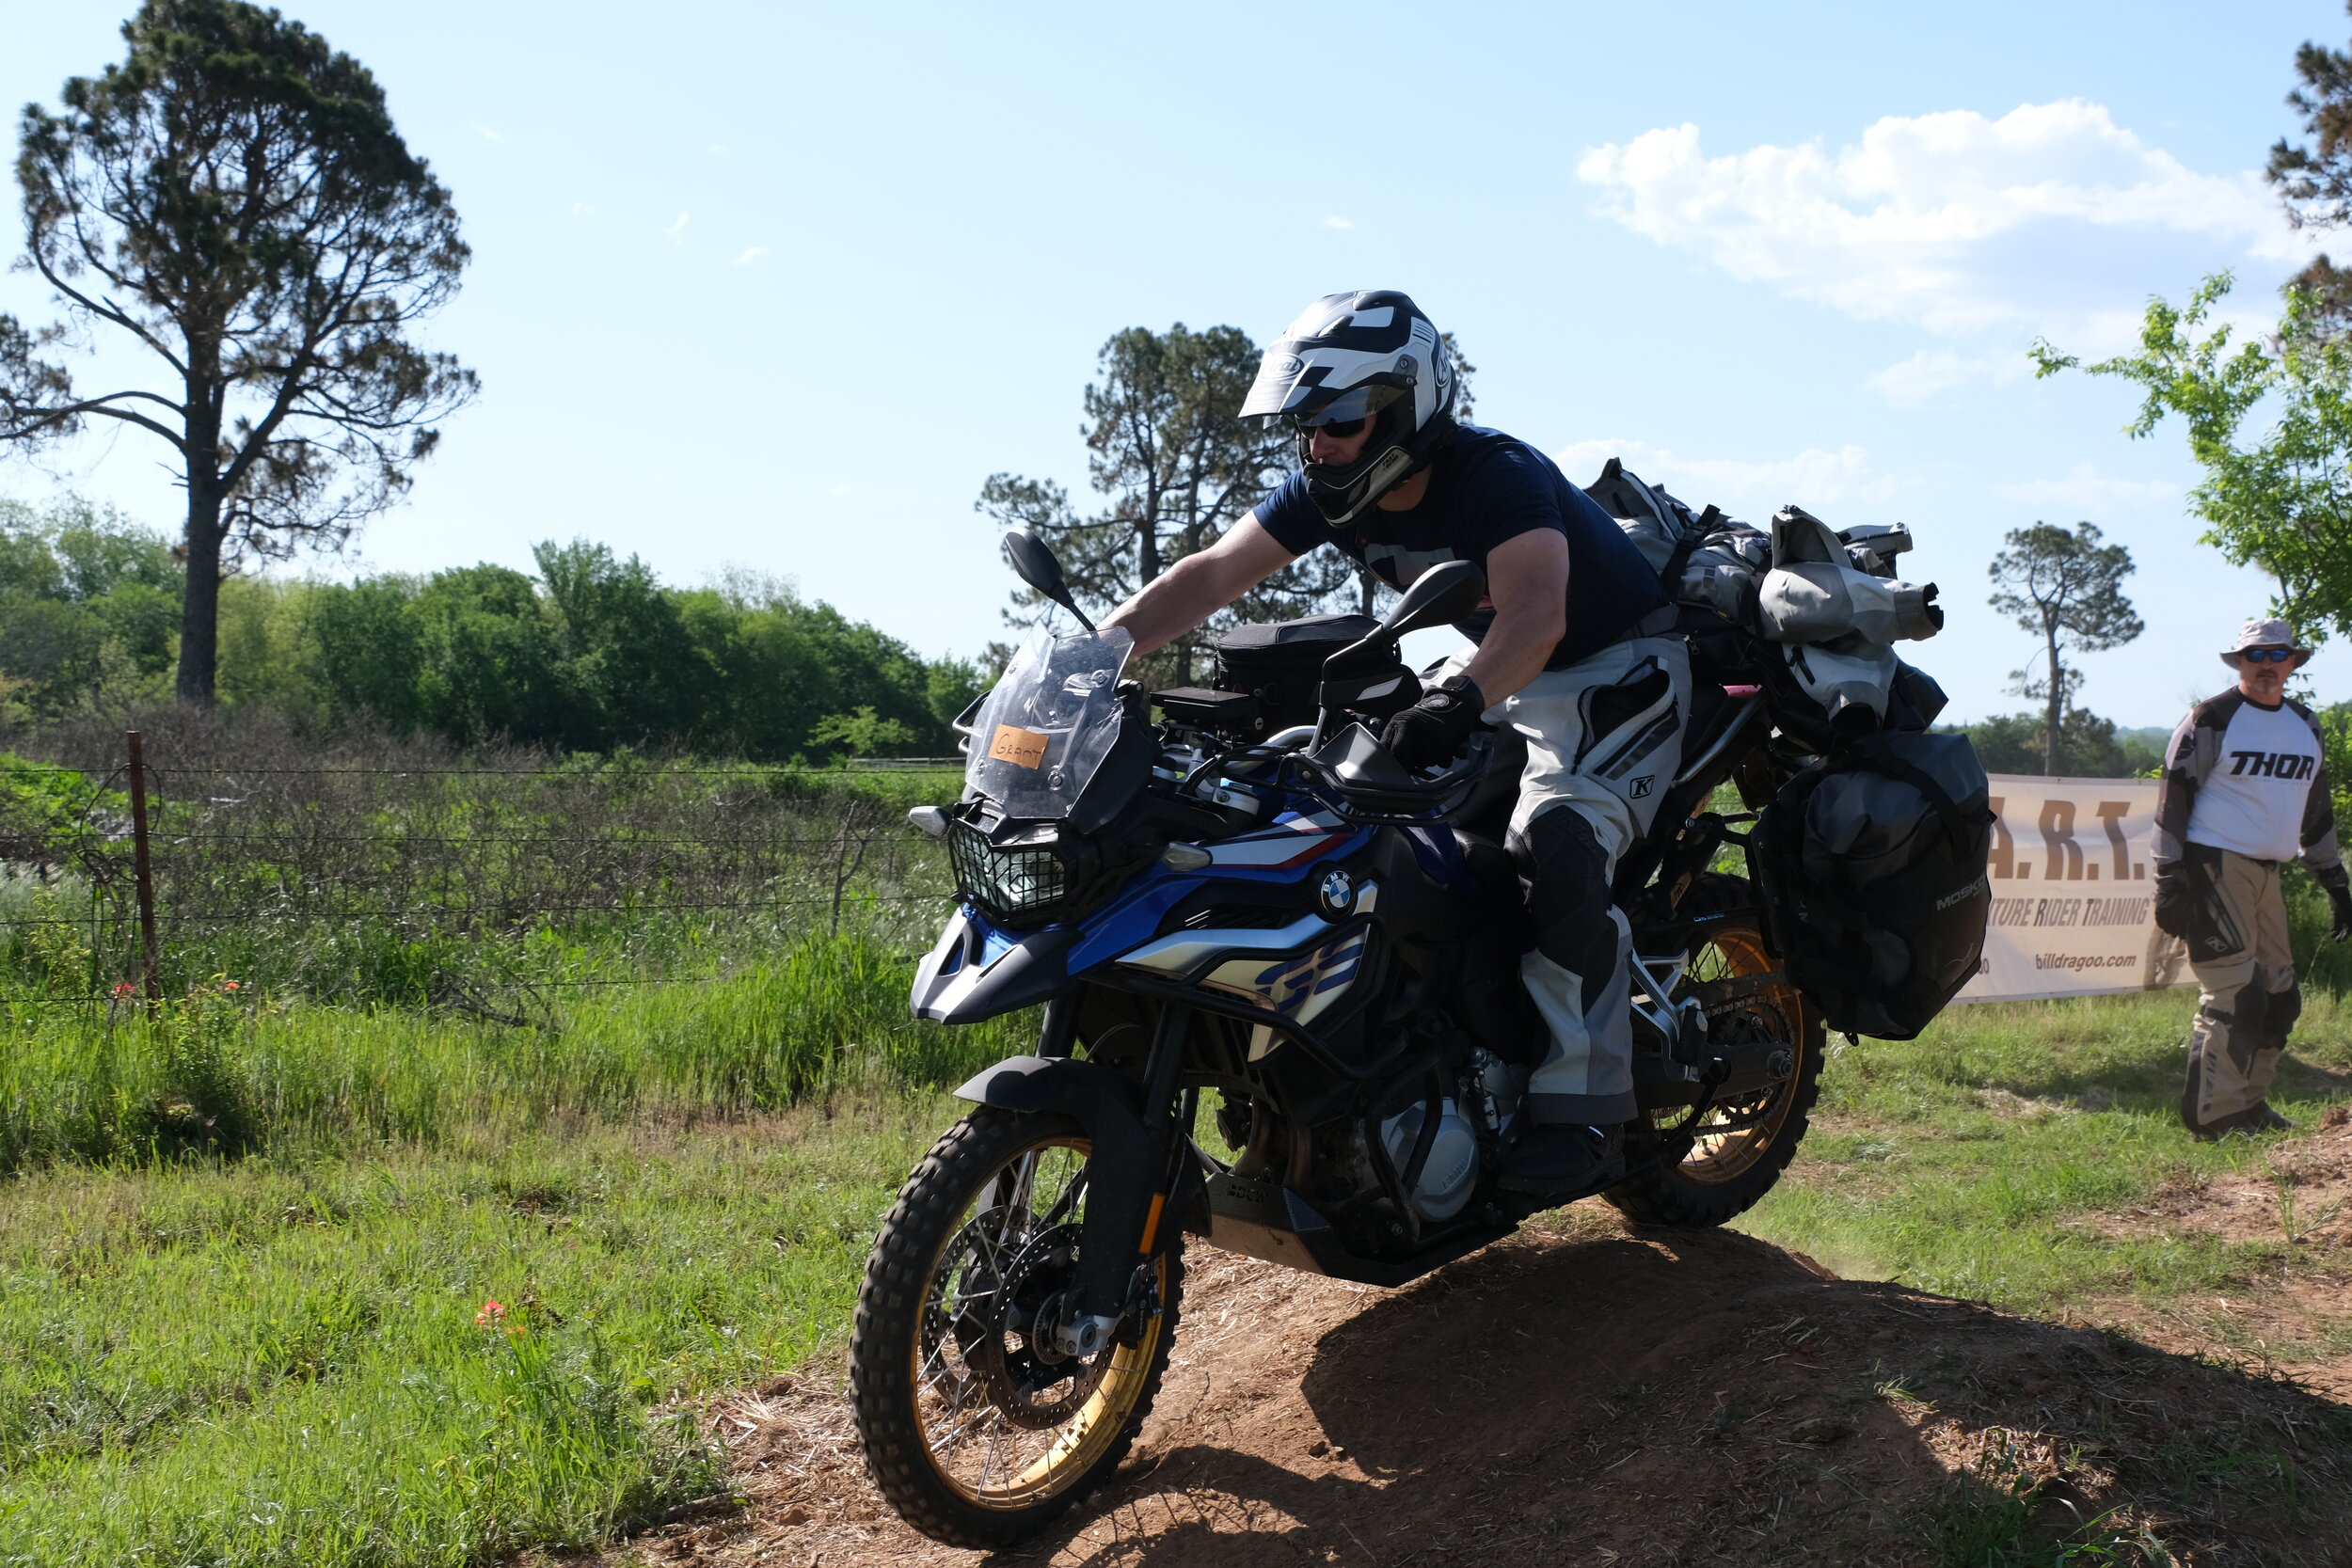 Proper body position is practiced on Quadzilla before the big hill is introduced.